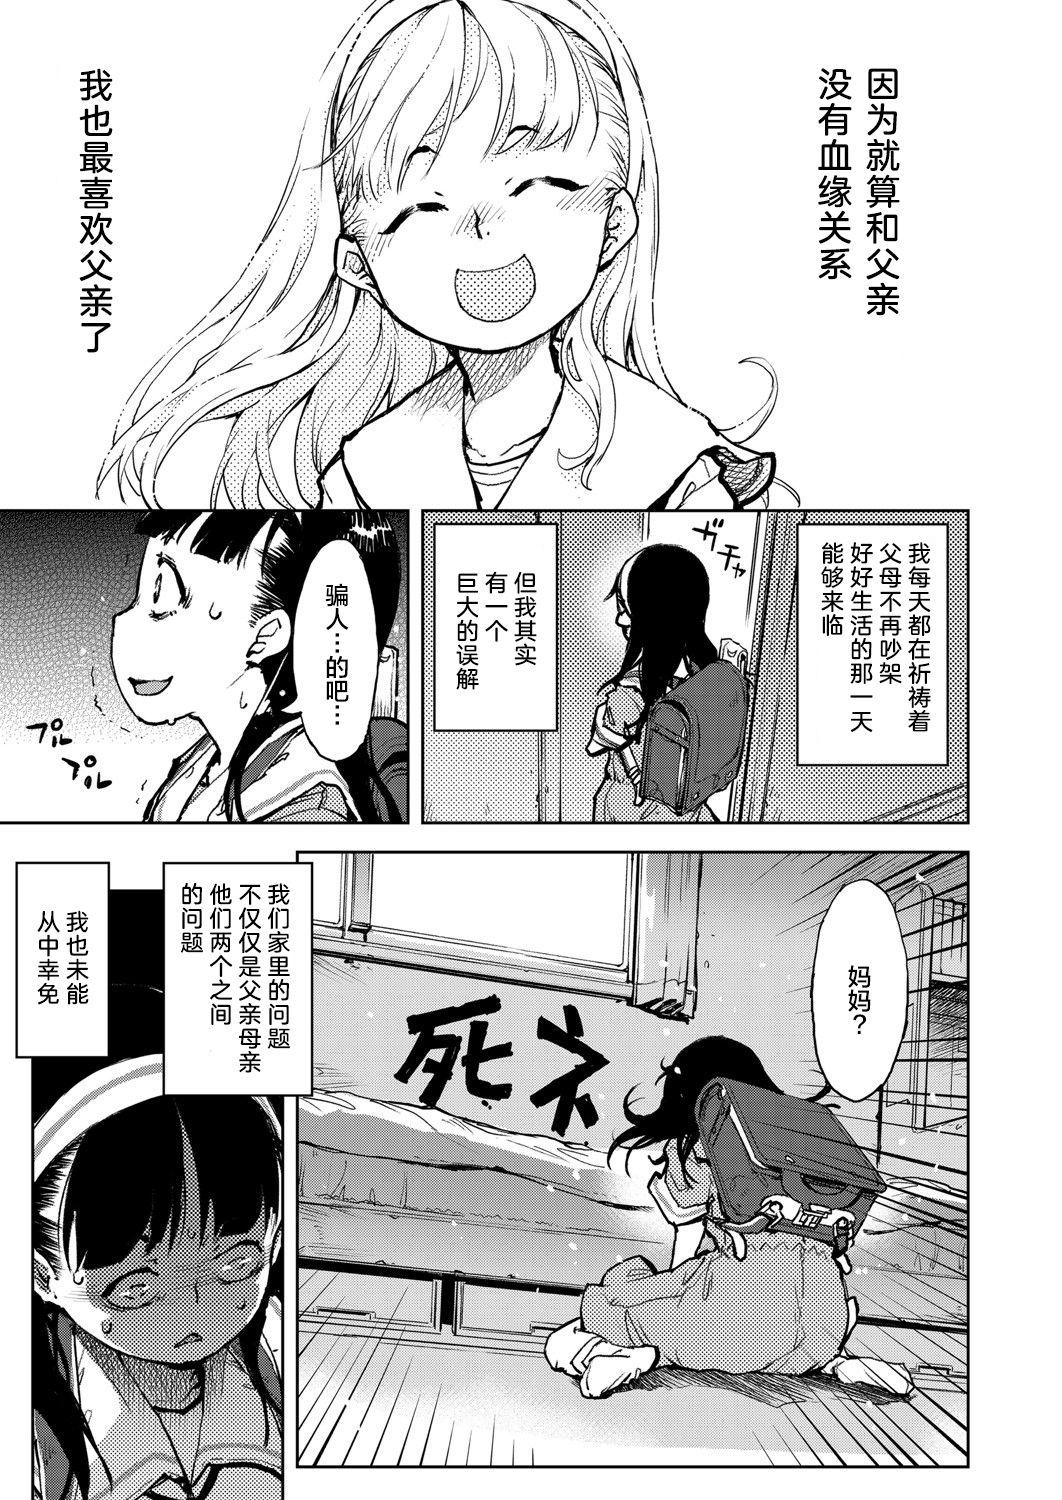 Best Blowjob Ever Tabakosan on the window 3 | 窗边的小烟 第三话 Calle - Page 4